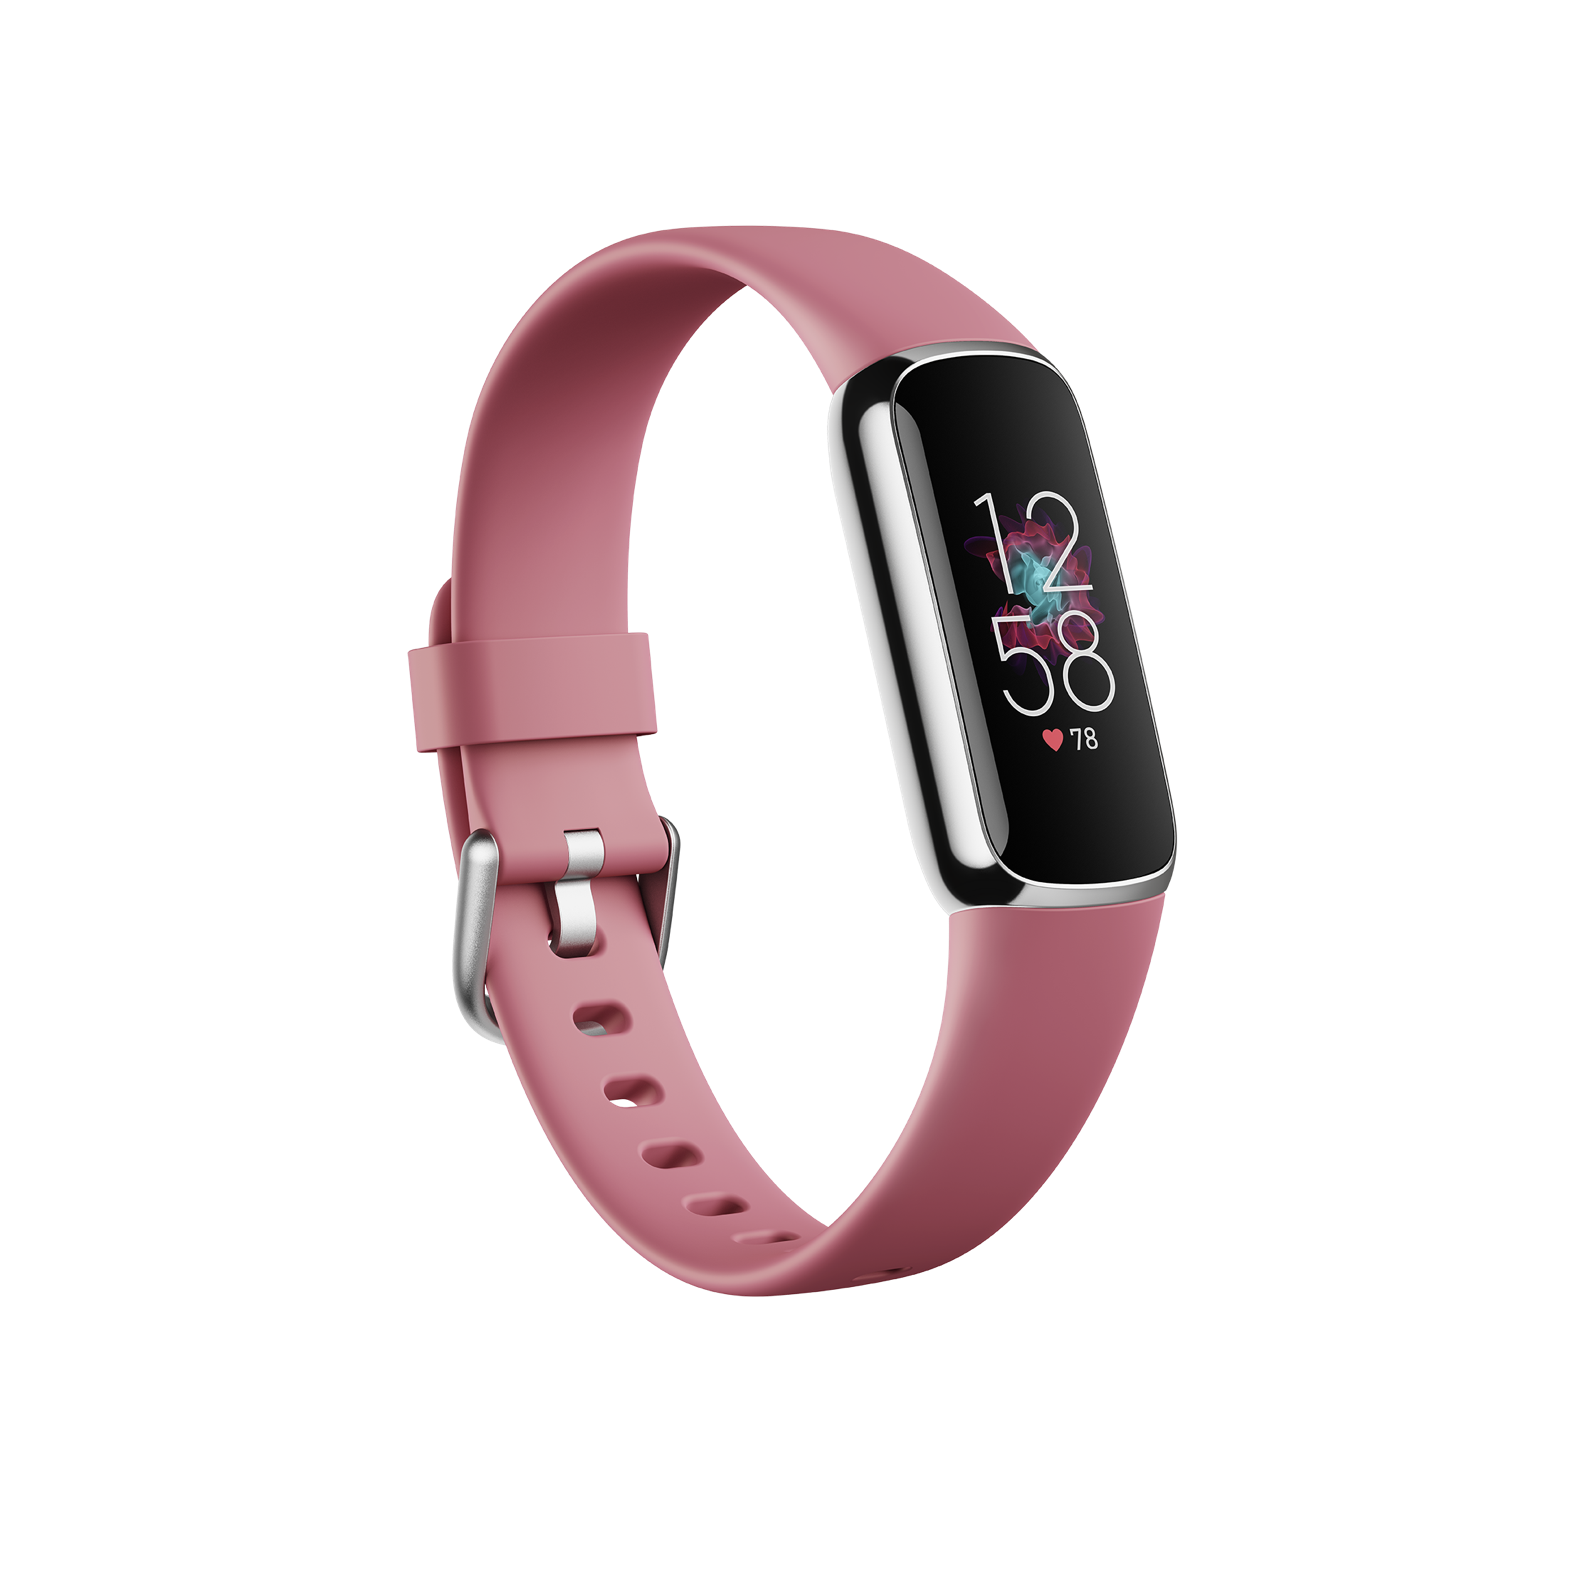 Fitbit 2x Clip Support pour Fitness Tracker Fitbit luxe kwmobile 